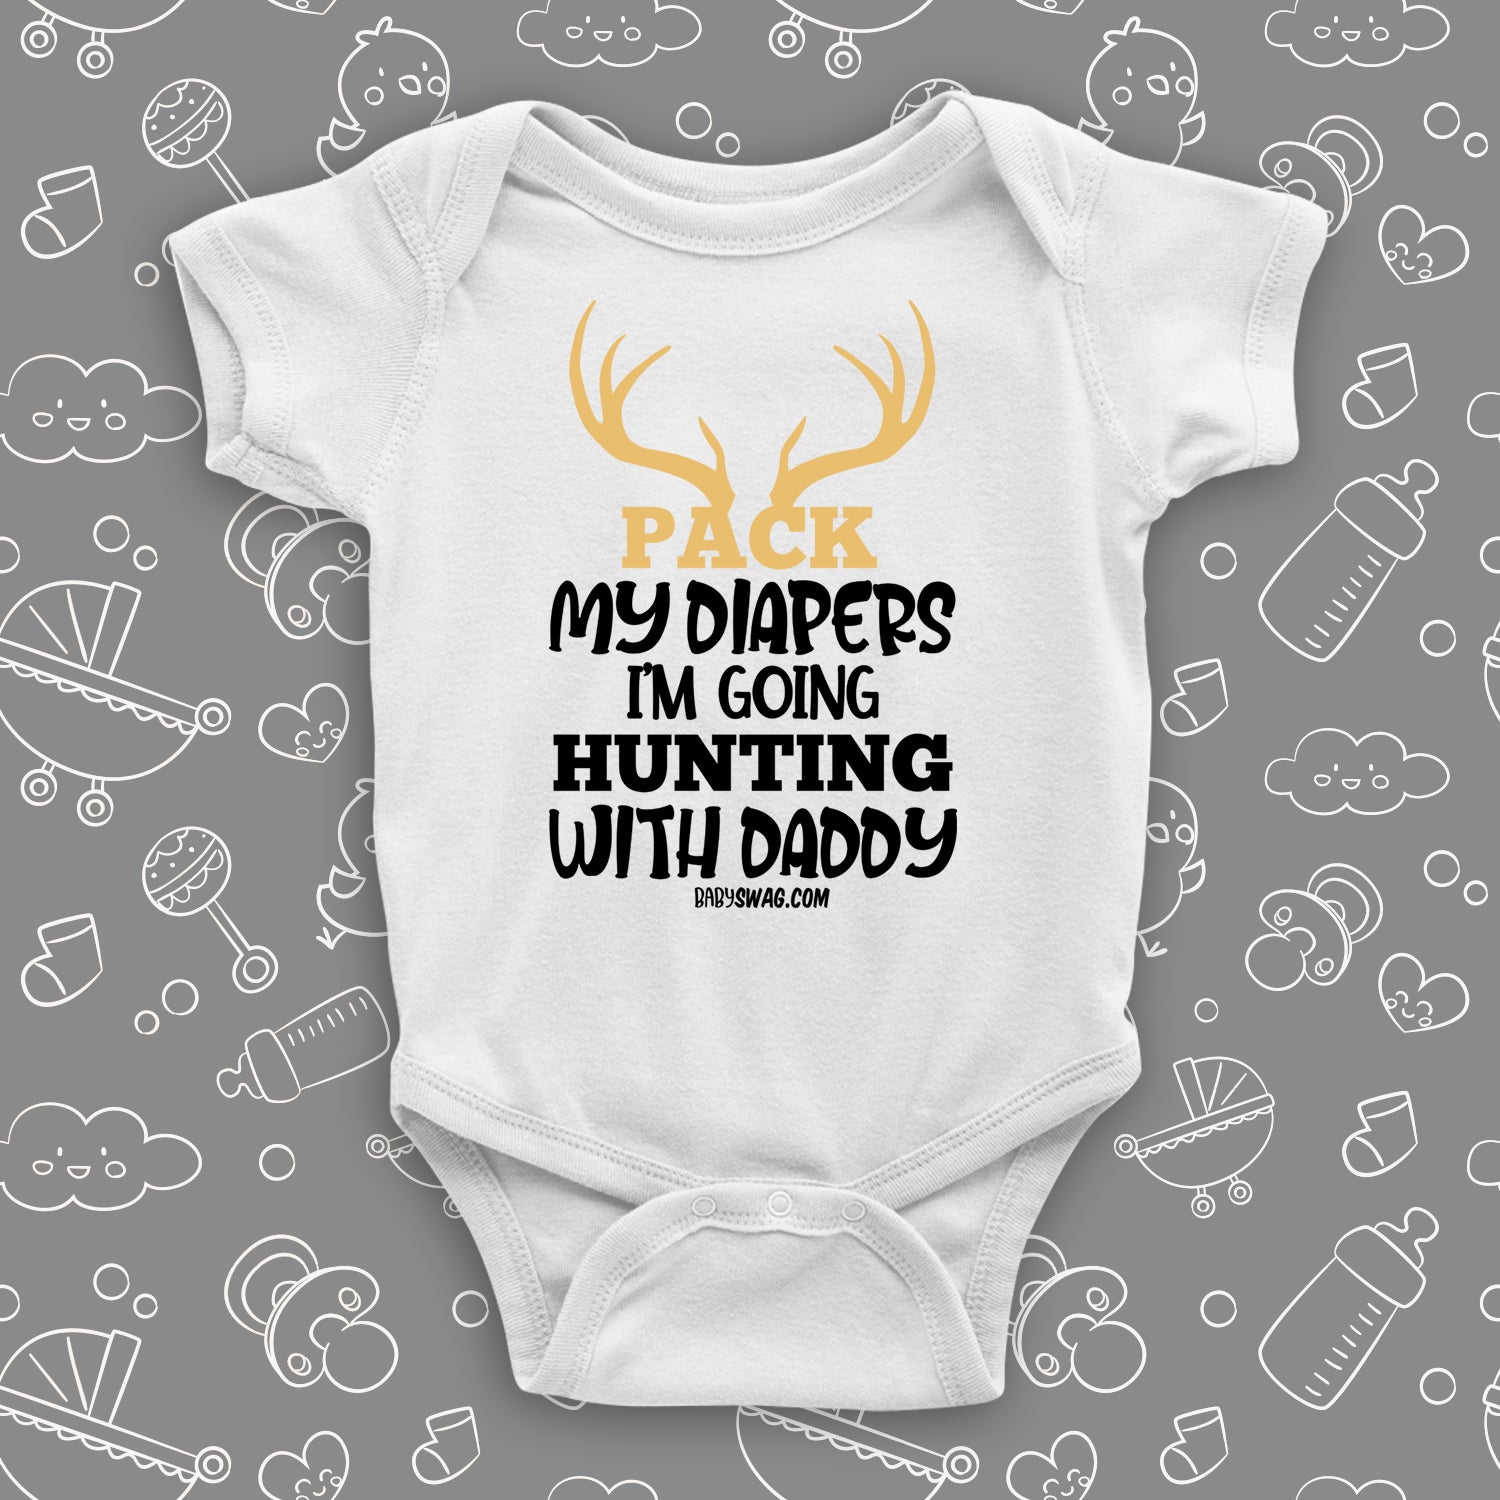 Pack My Diapers I'M Going Fishing With Daddy Funny Fishing Baby Bodysuit  Fishing Boy Onesie Fishing Daddy Daughter Set